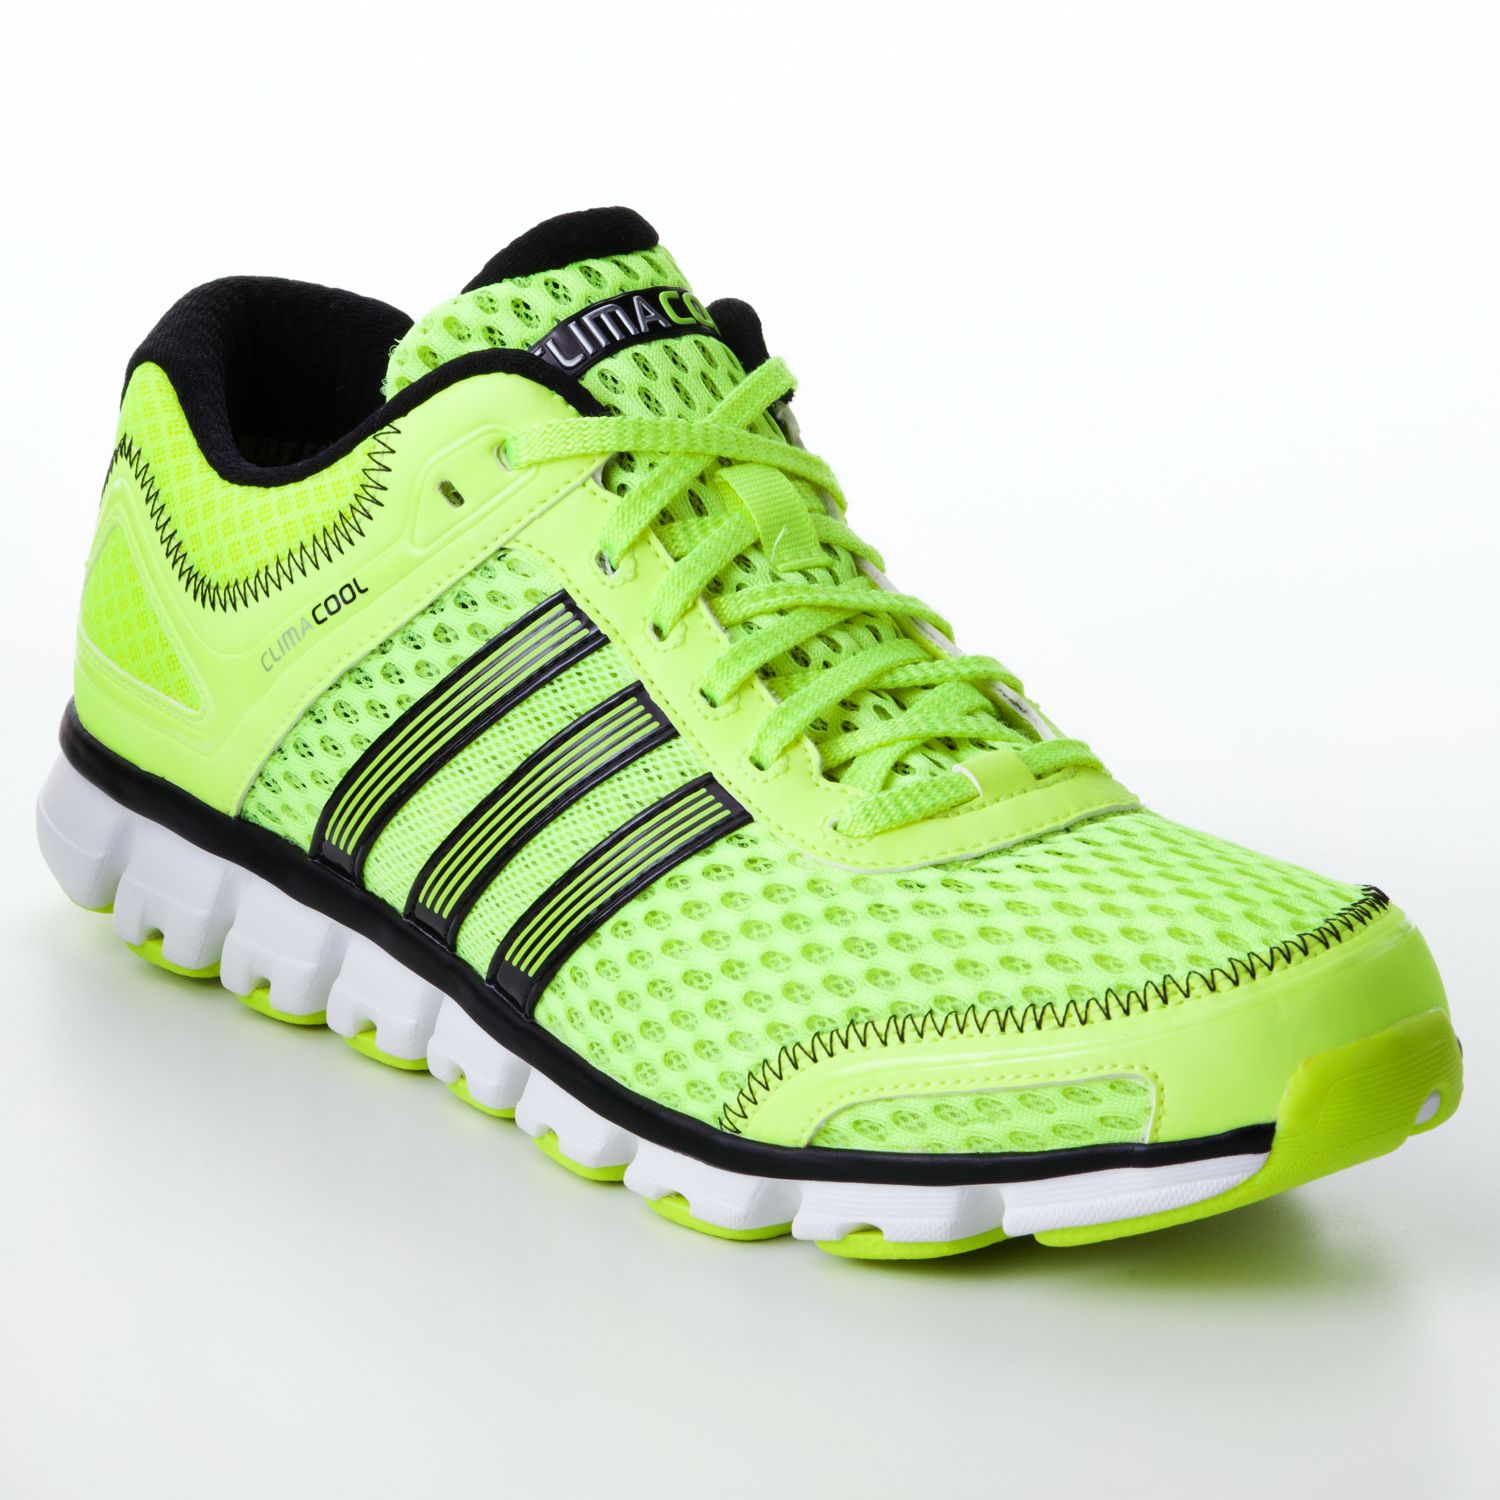 adidas climacool modulate mens running shoes